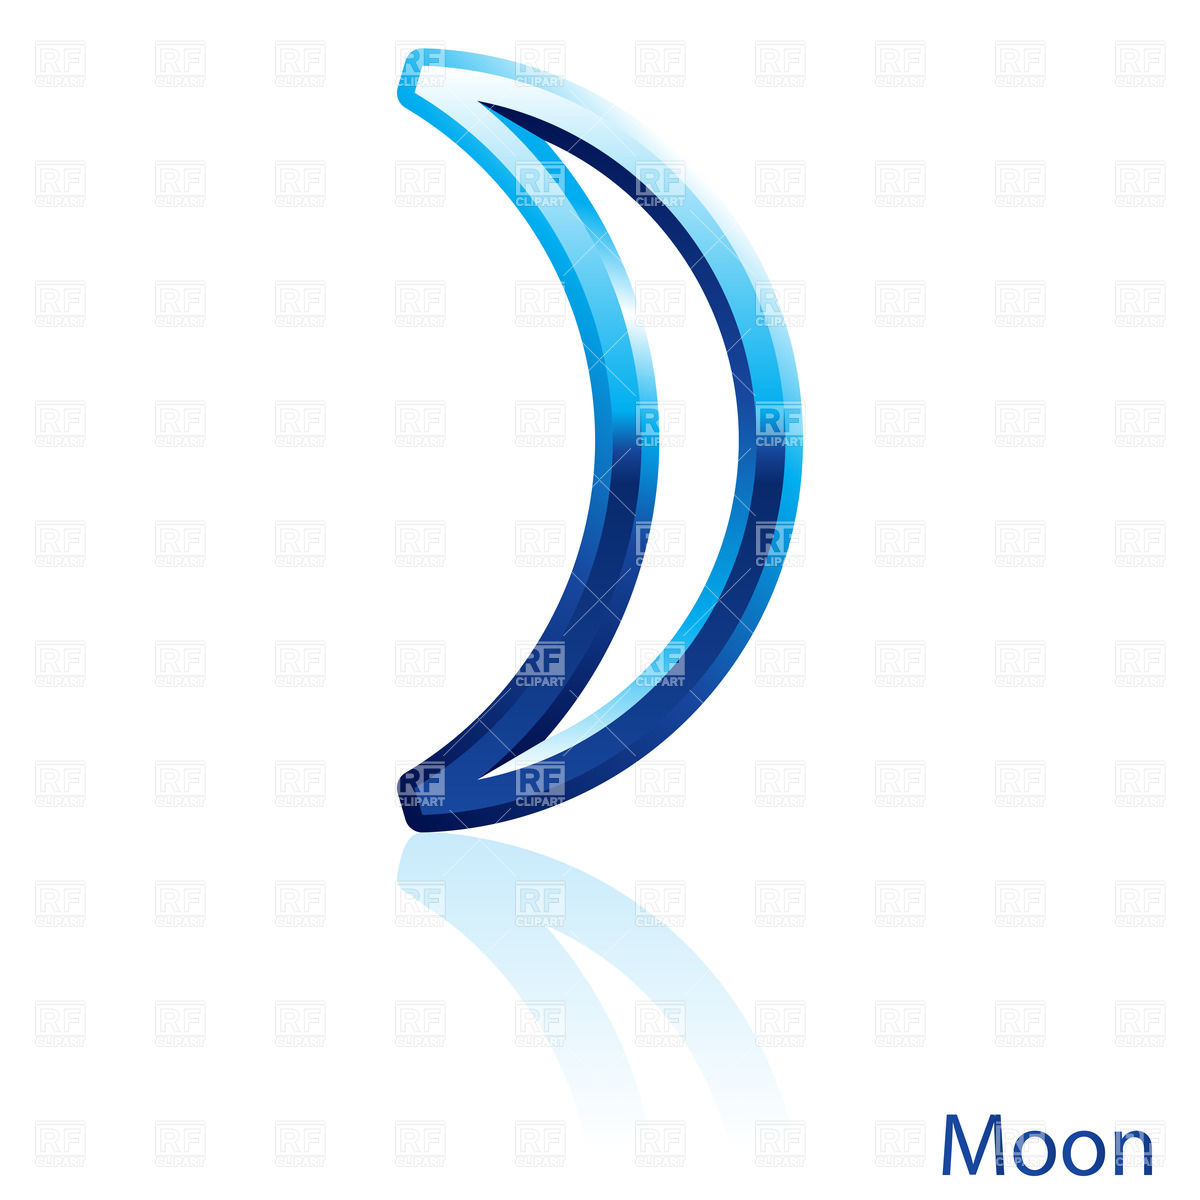 Shiny Blue Moon Sign On White Background Download Royalty Free Vector